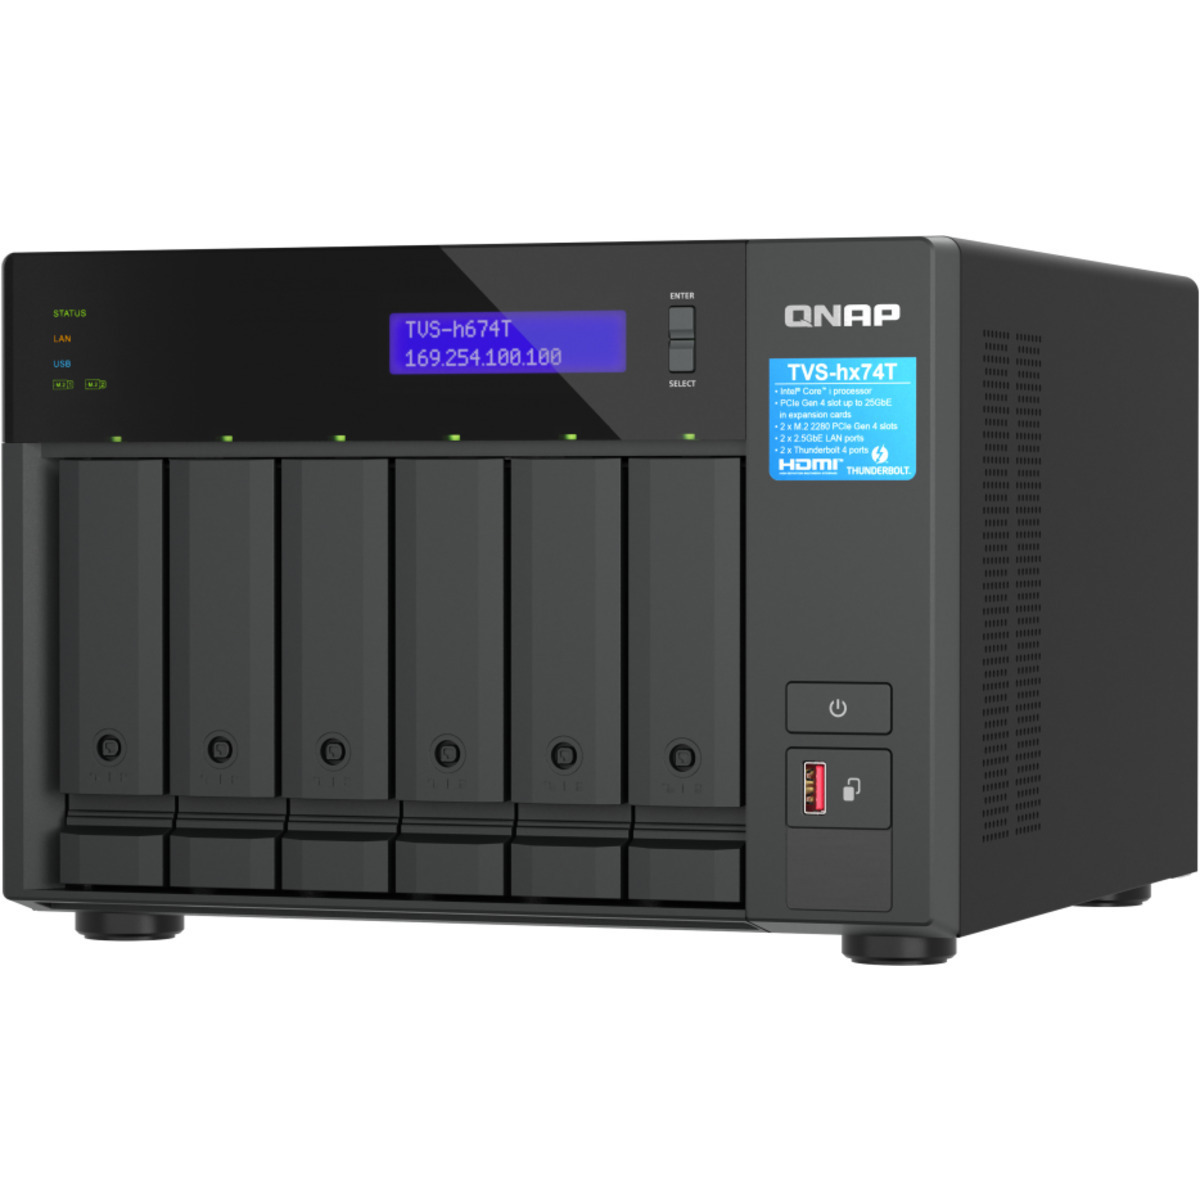 QNAP TVS-h674T Core i5 Thunderbolt 4 48tb 6-Bay Desktop Multimedia / Power User / Business DAS-NAS - Combo Direct + Network Storage Device 4x12tb Seagate IronWolf Pro ST12000NT001 3.5 7200rpm SATA 6Gb/s HDD NAS Class Drives Installed - Burn-In Tested - ON SALE TVS-h674T Core i5 Thunderbolt 4